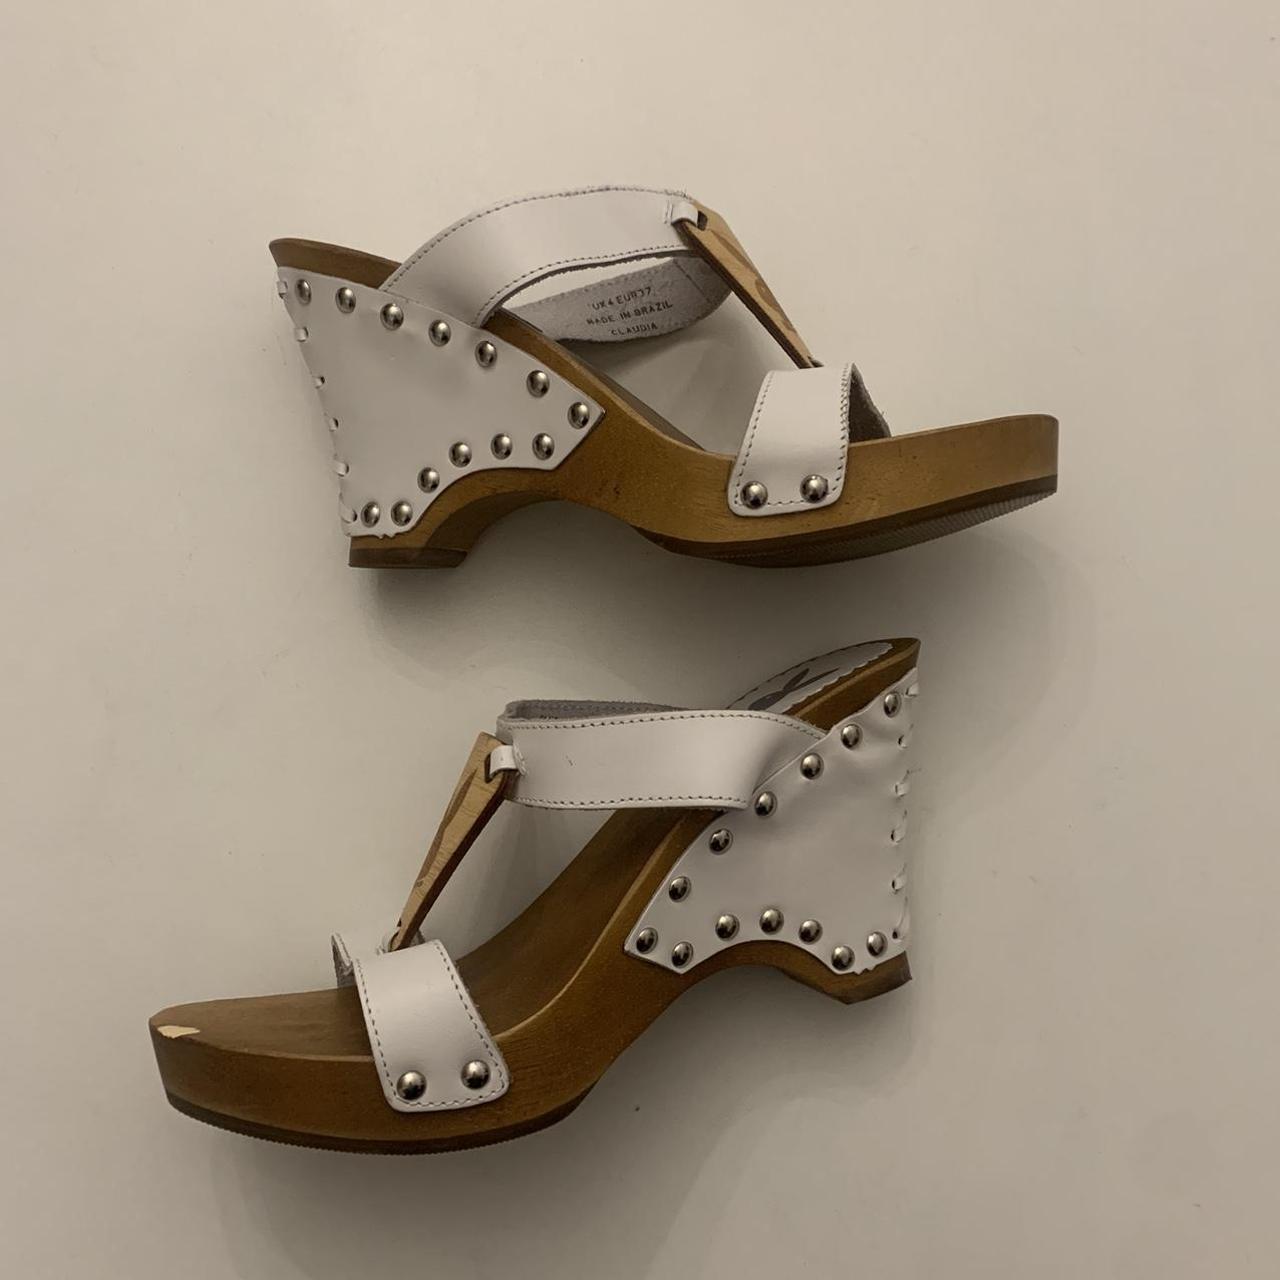 Playboy Women's White and Brown Sandals | Depop